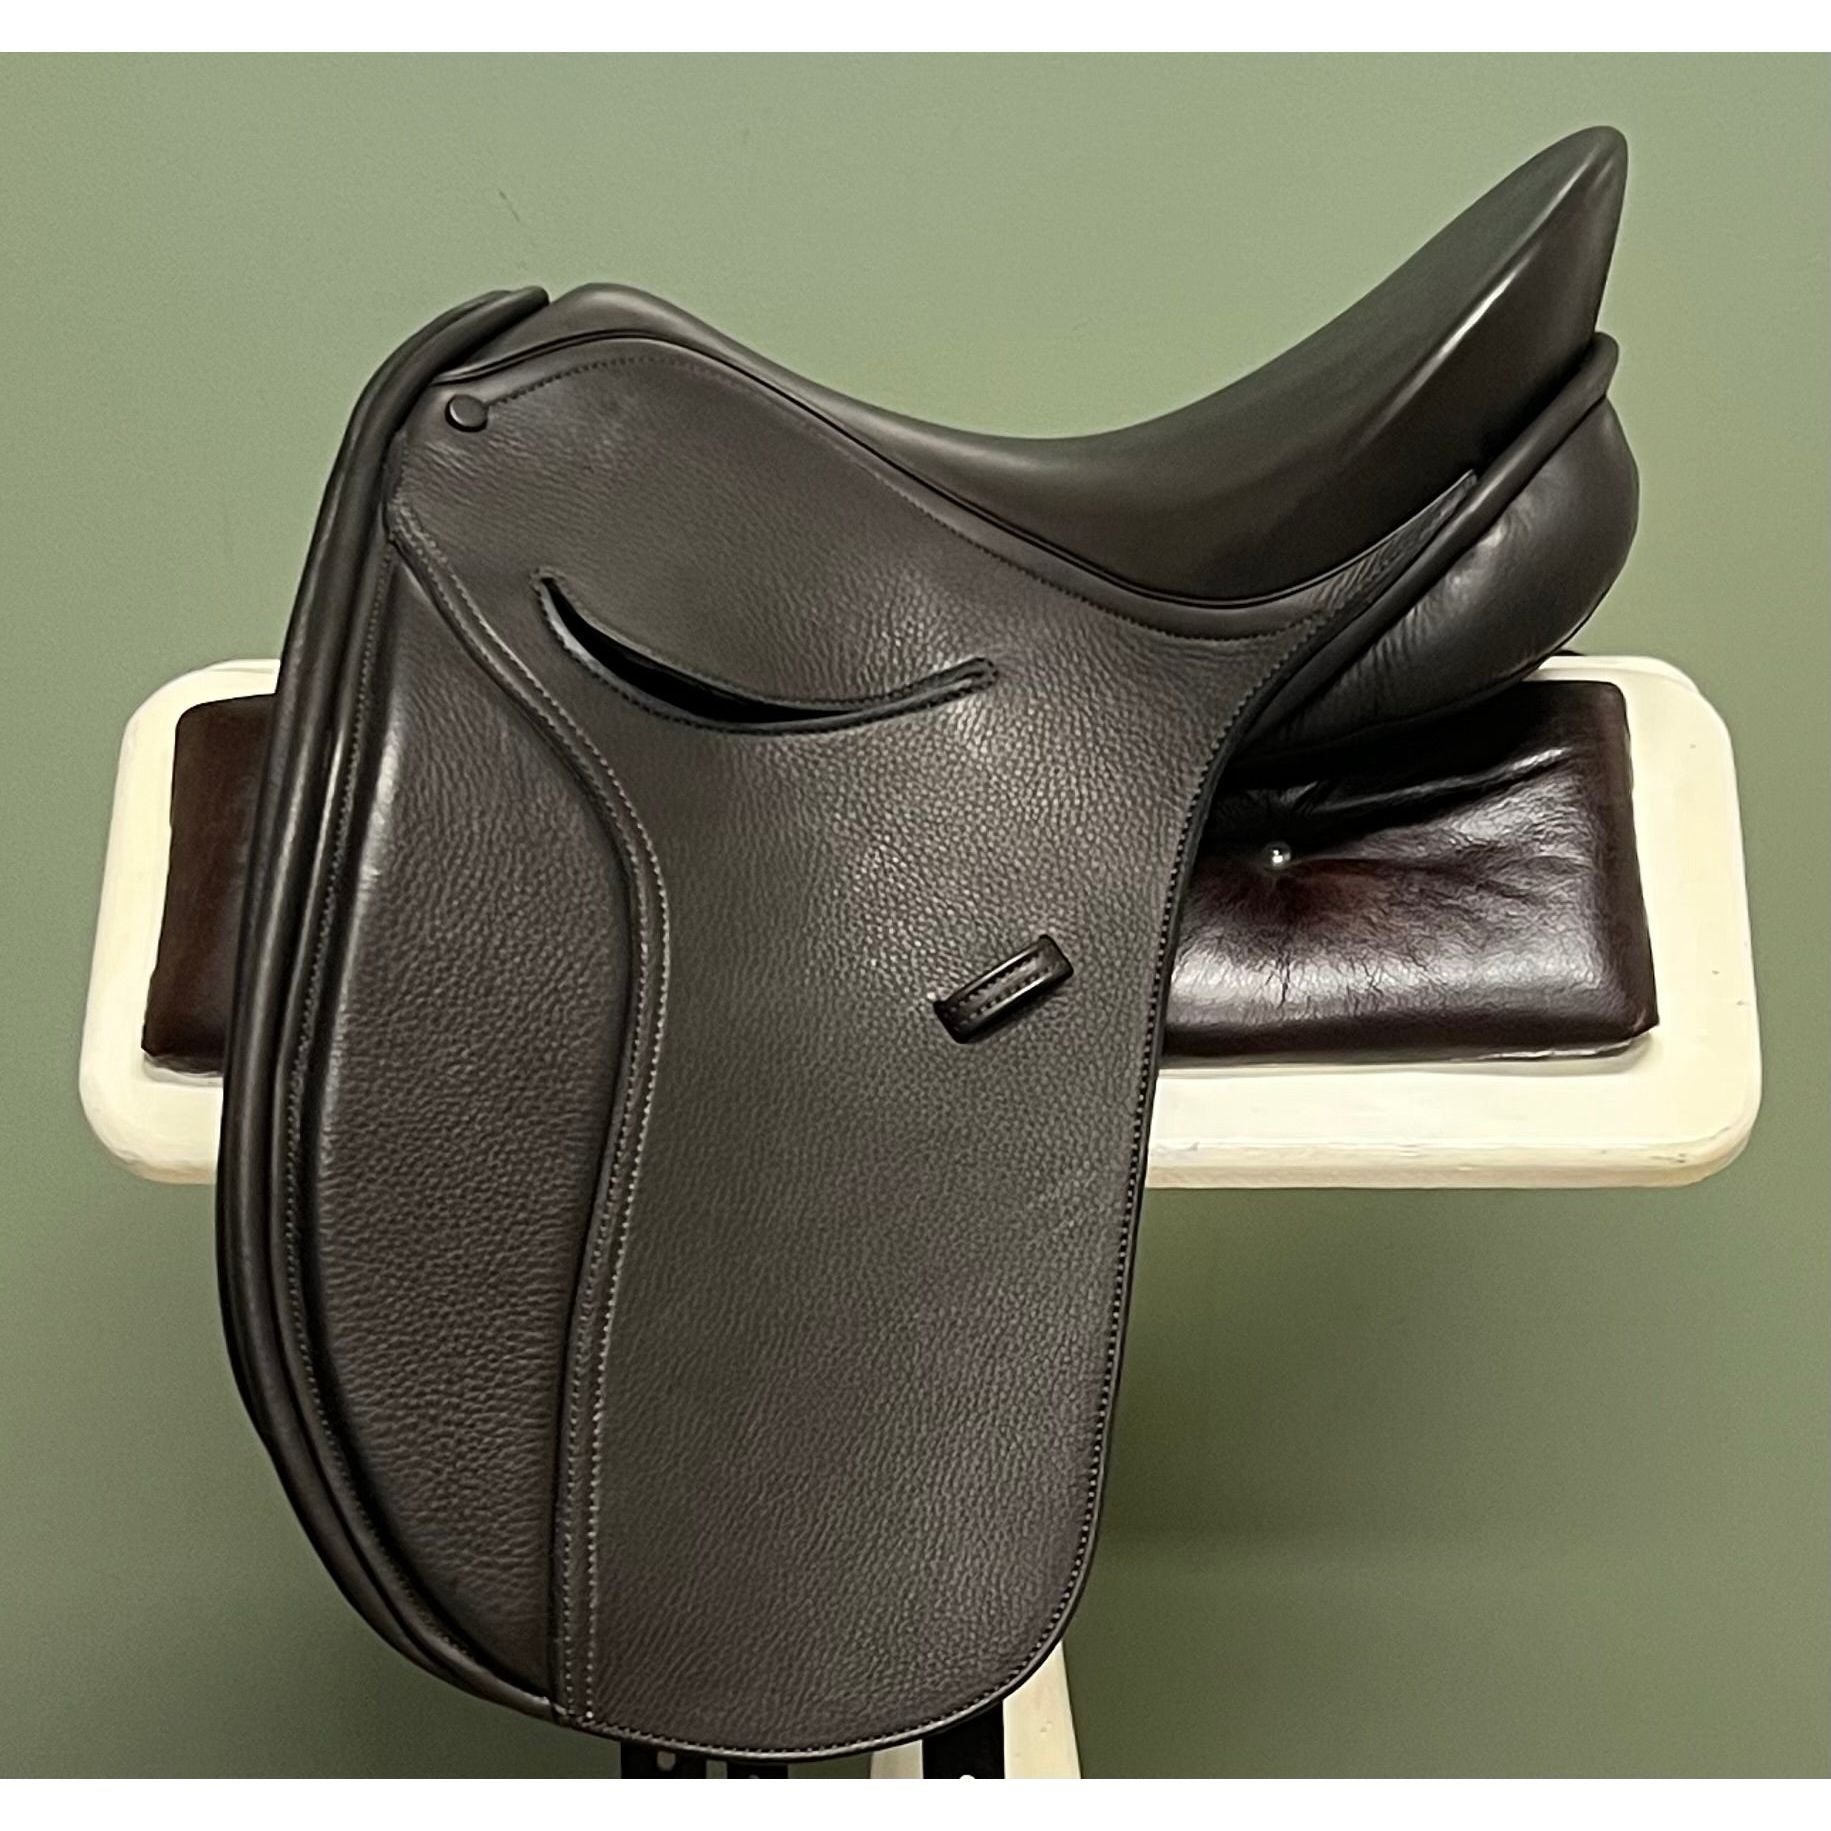 STOCK CLEARANCE PH Royal 2 Saddle Dark Havana with covered buttons Size 16"